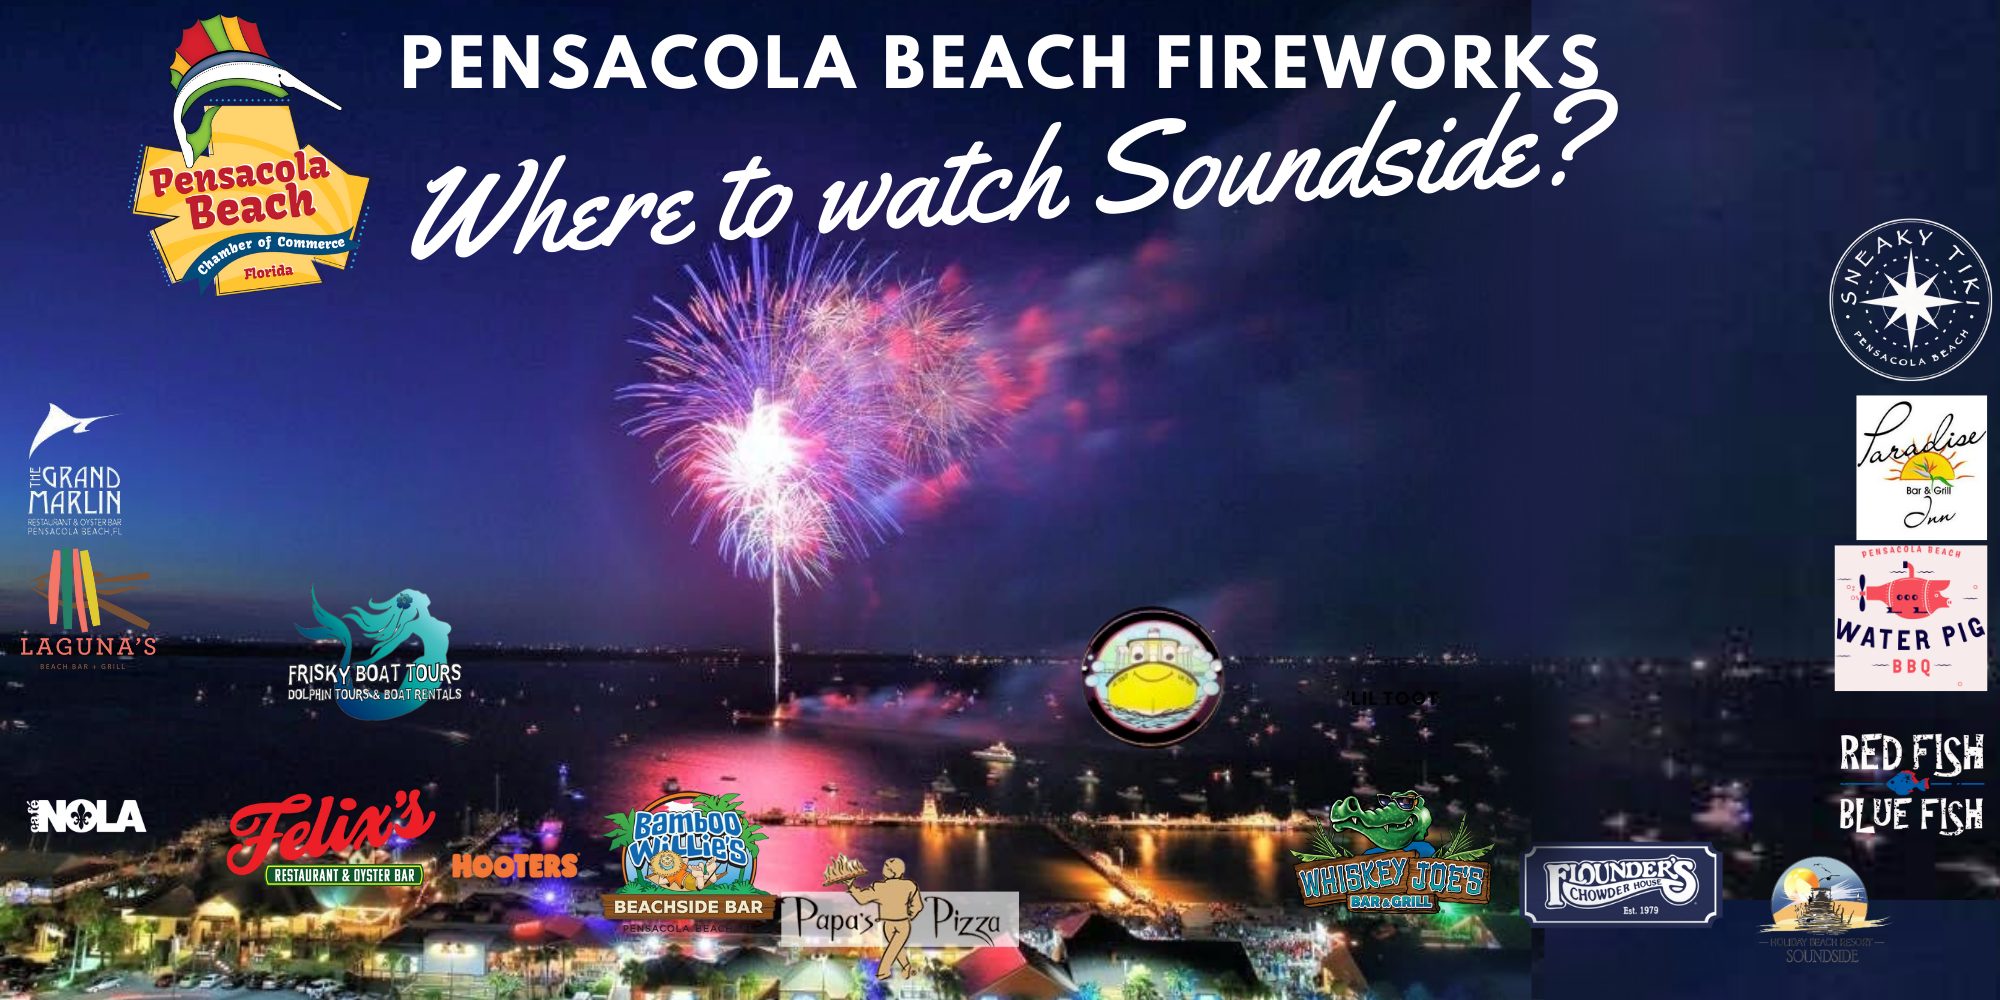 where to watch the fireworks soundside